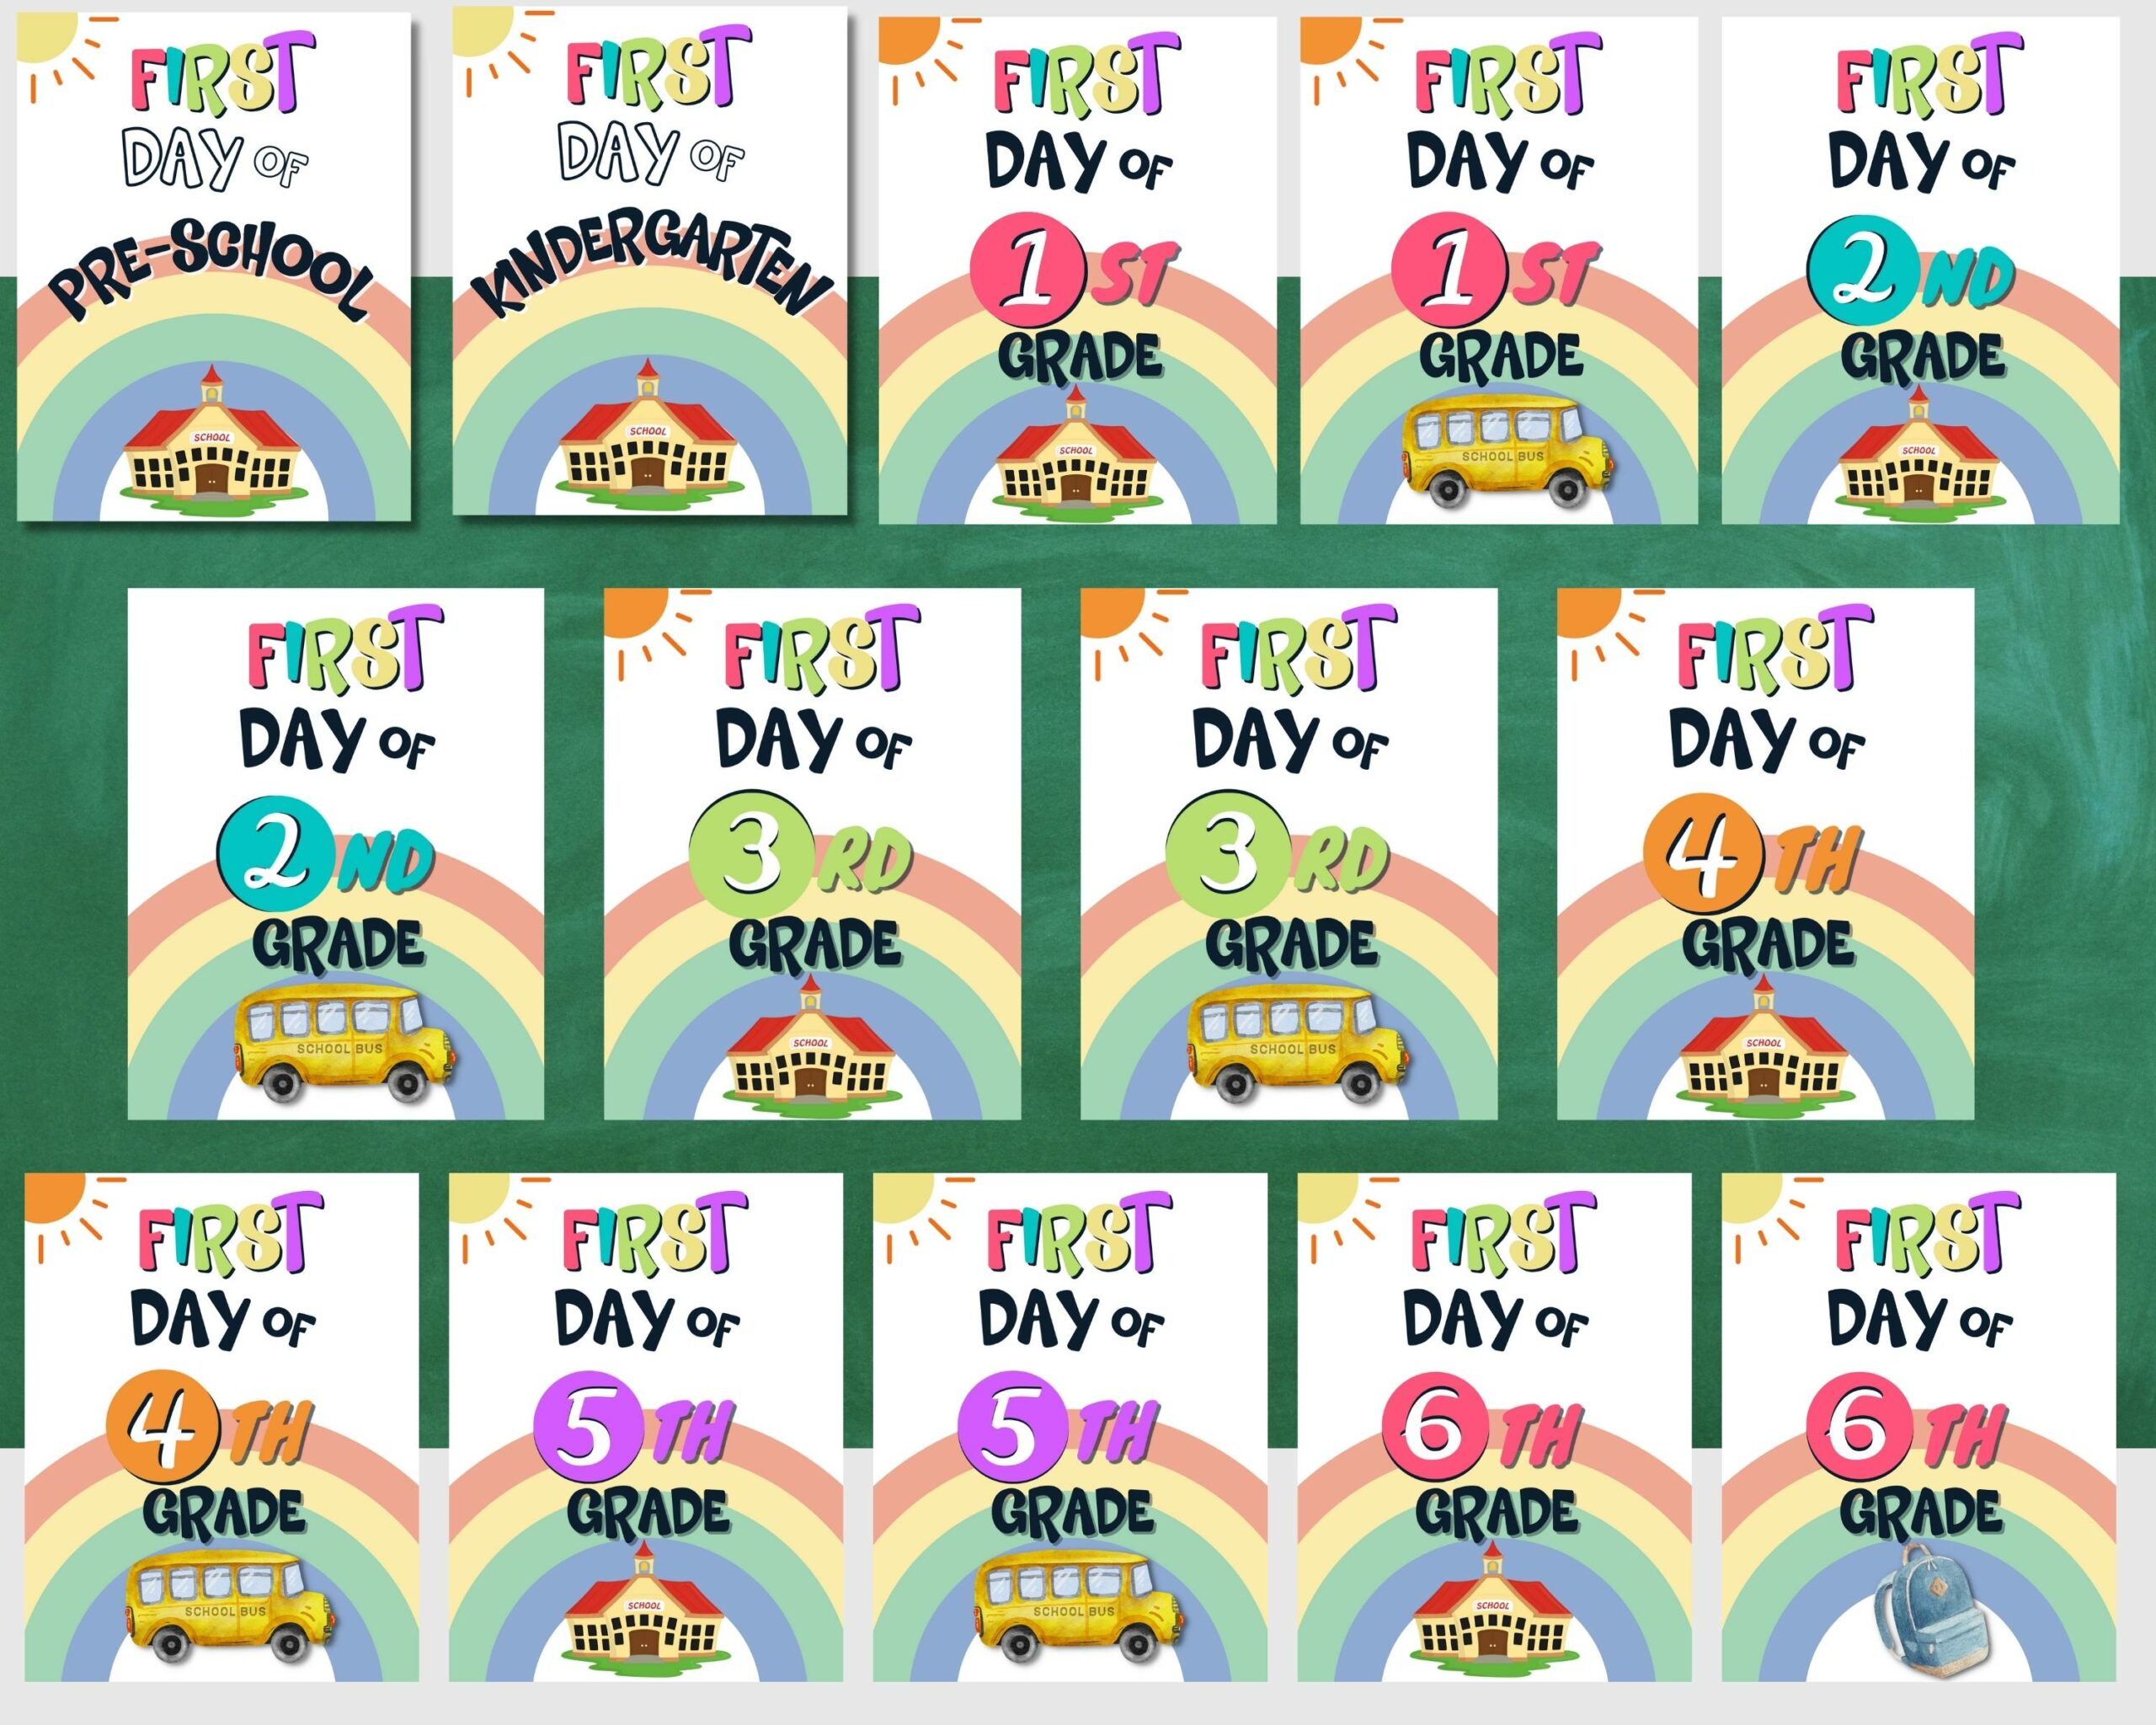 First Day of School Printable